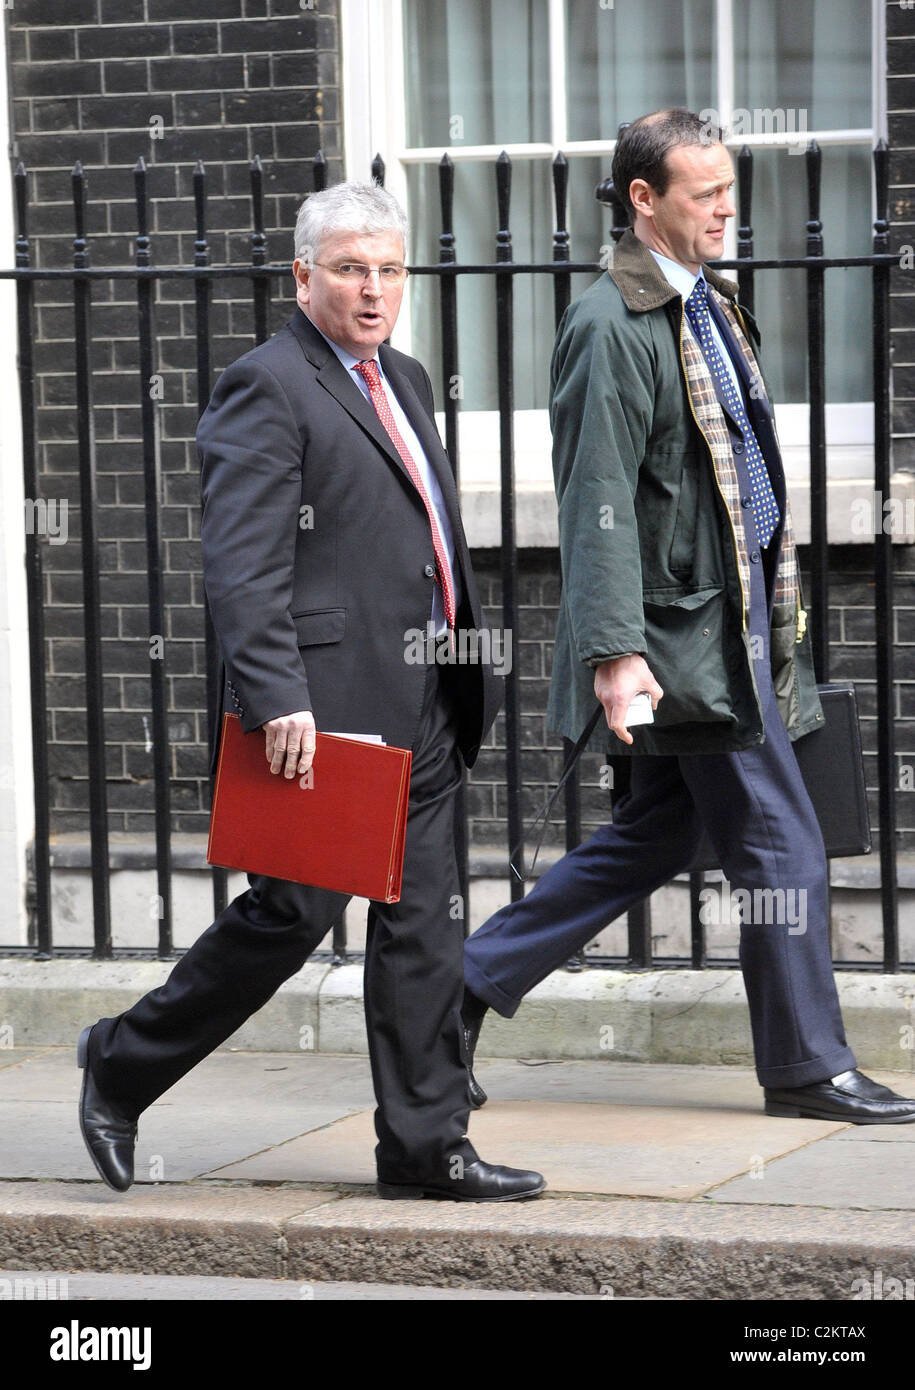 Des Browne Ministers arrive for a cabinet meeting at 10 Downing Street London, England - 04.03.08 : Stock Photo